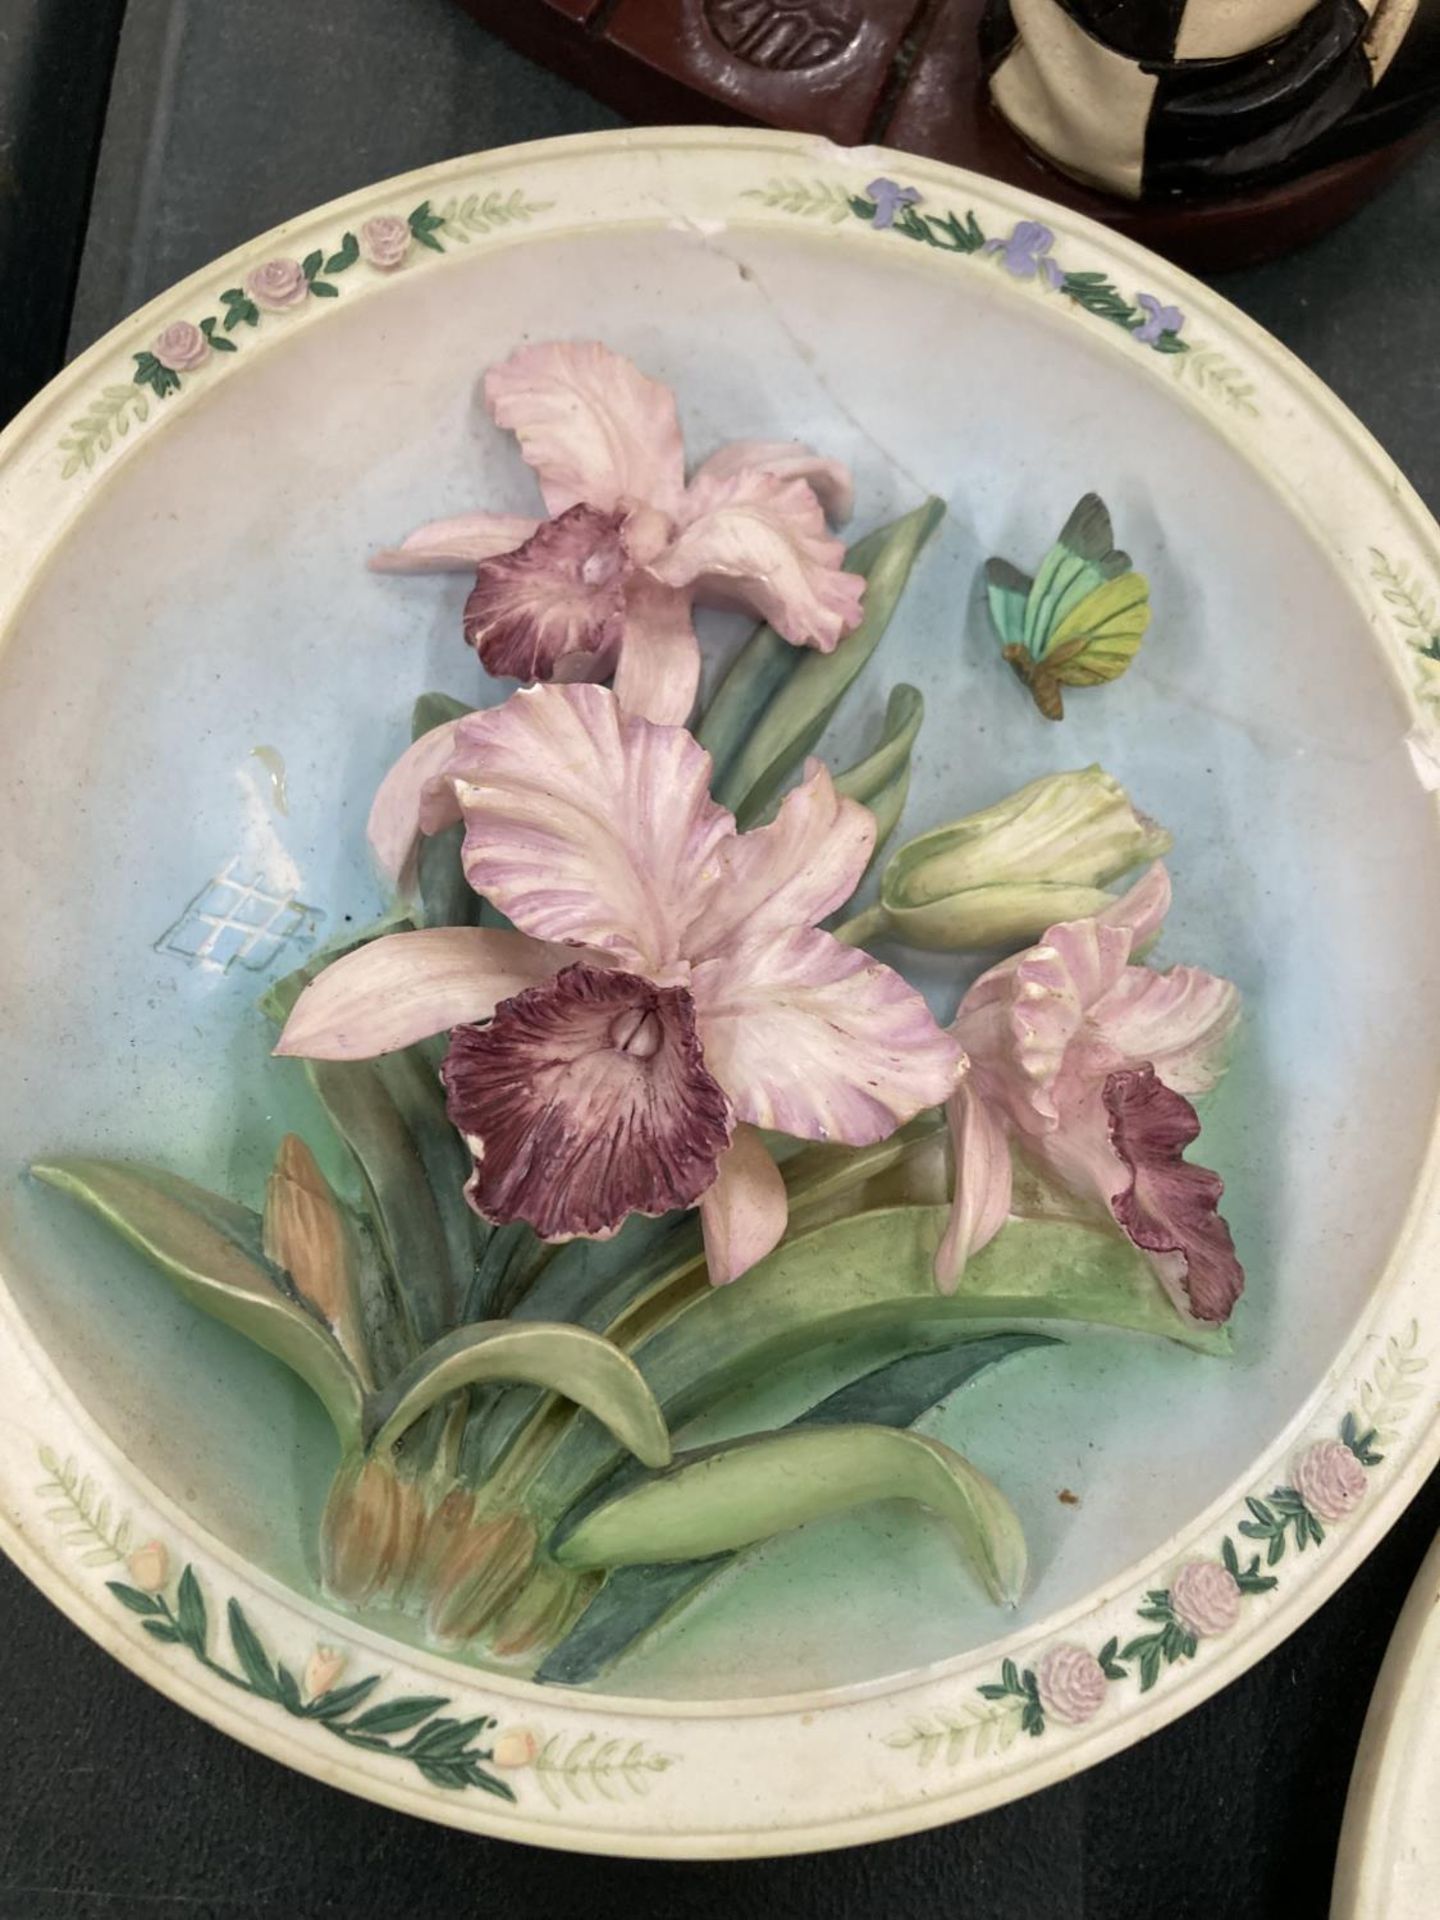 A COLLECTION OF LENA LIU 'BEAUTIFUL GARDENS' CABINET PLATES - 6 IN TOTAL, SOME A/F - Image 7 of 7